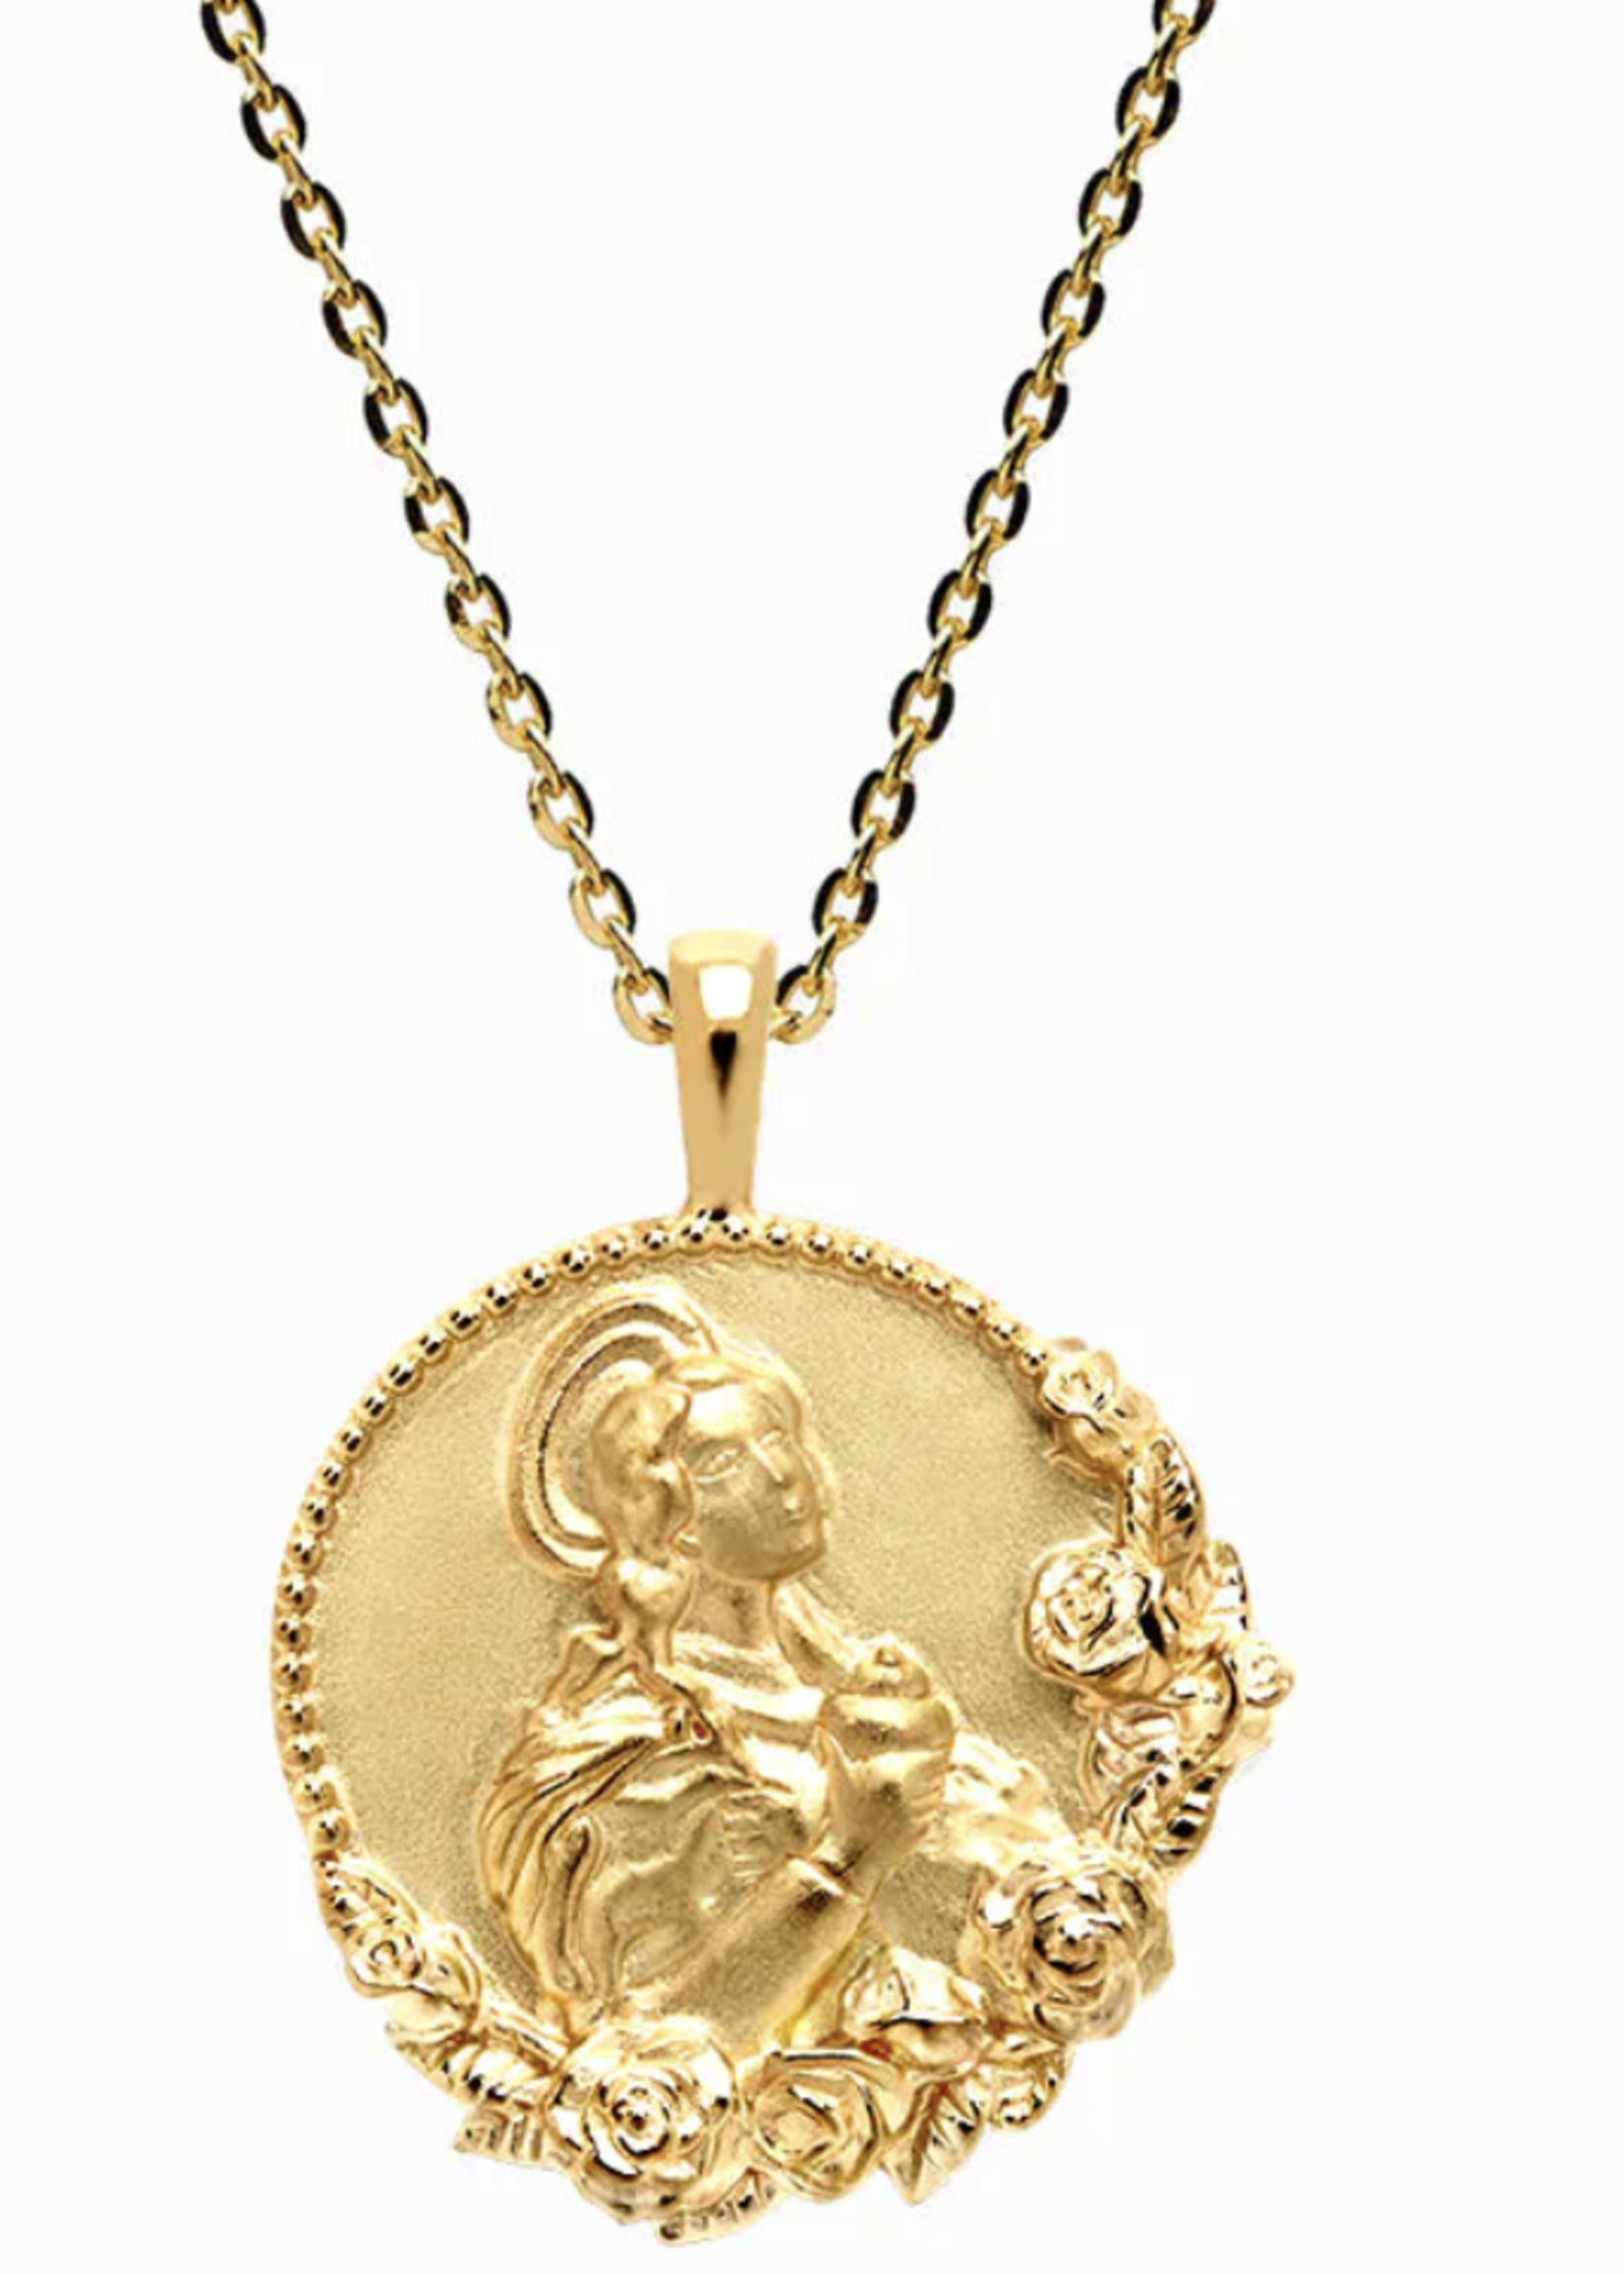 Mary Magdalene Necklace - Gold